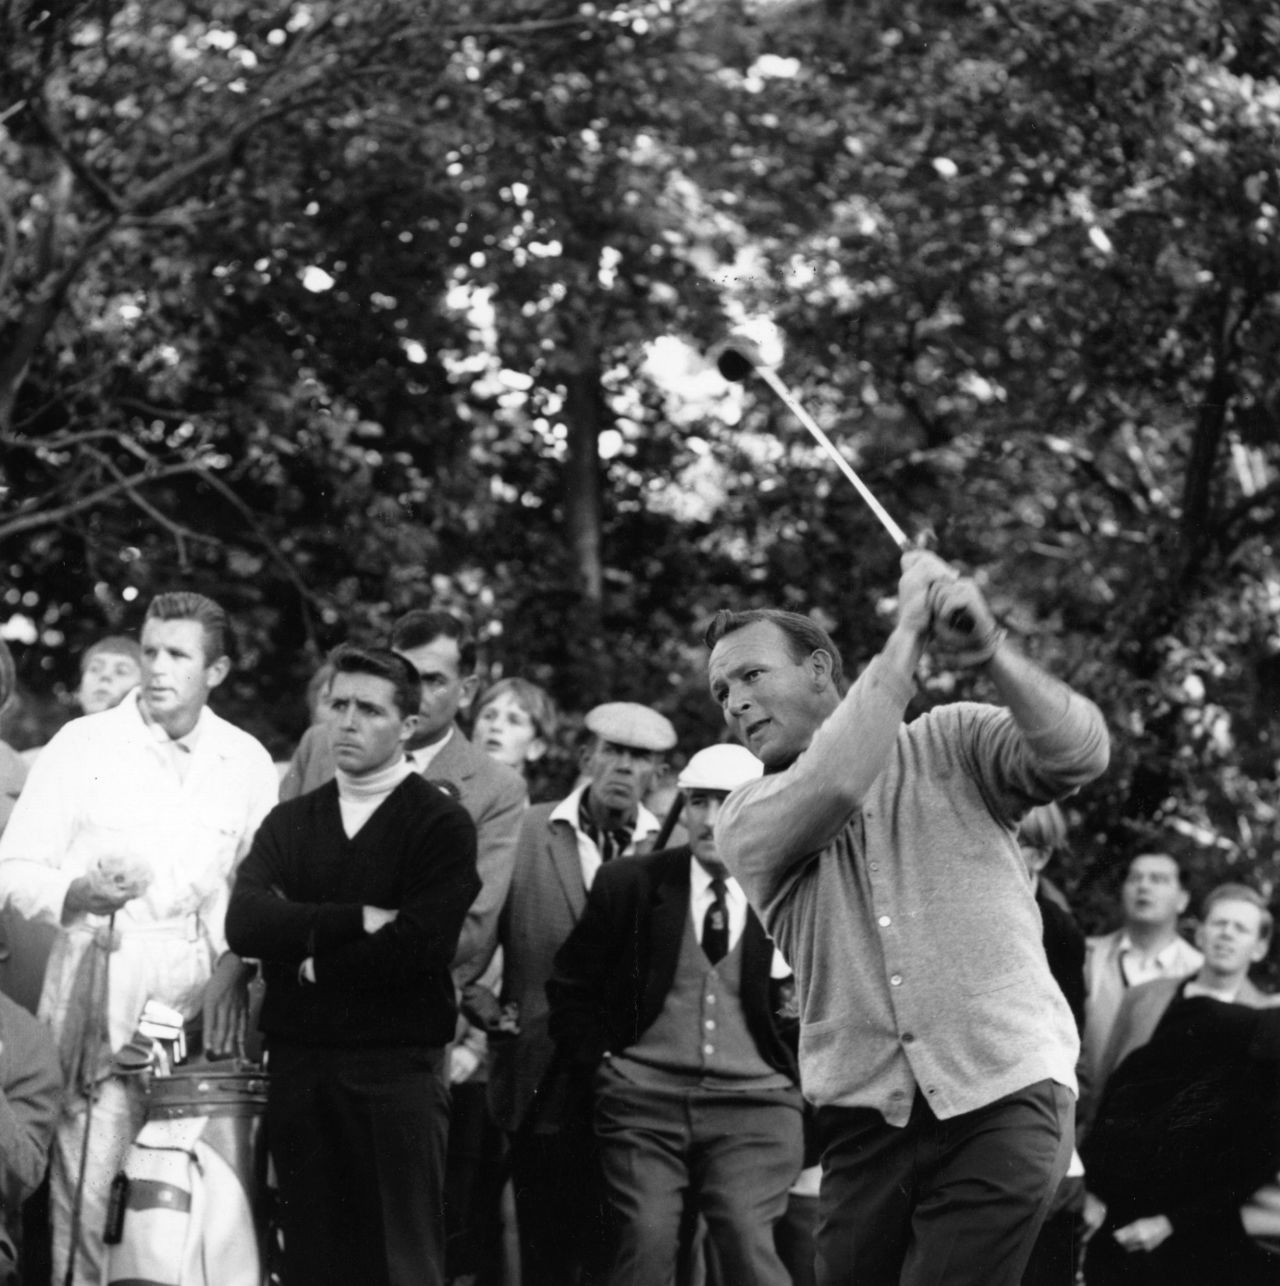 Thanks to his golfing prowess and good looks, Palmer greatly helped to popularize the sport in the 1950s, when television coverage took off.